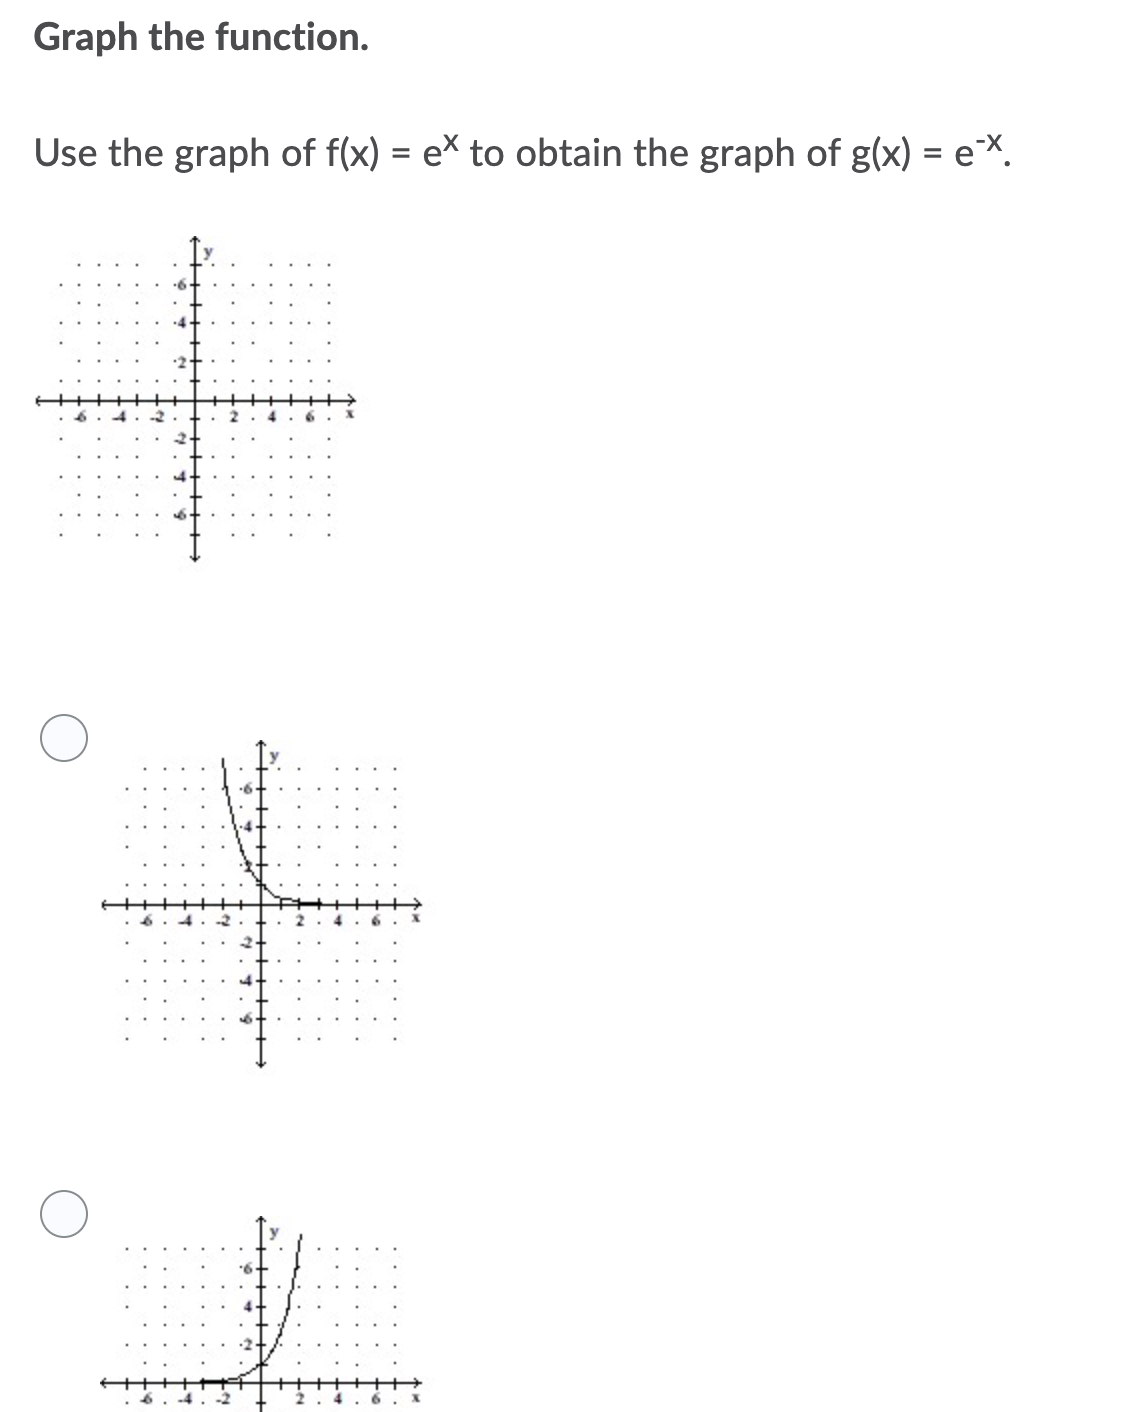 Graph the function.
Use the graph of f(x) = e* to obtain the graph of g(x) = eX.
